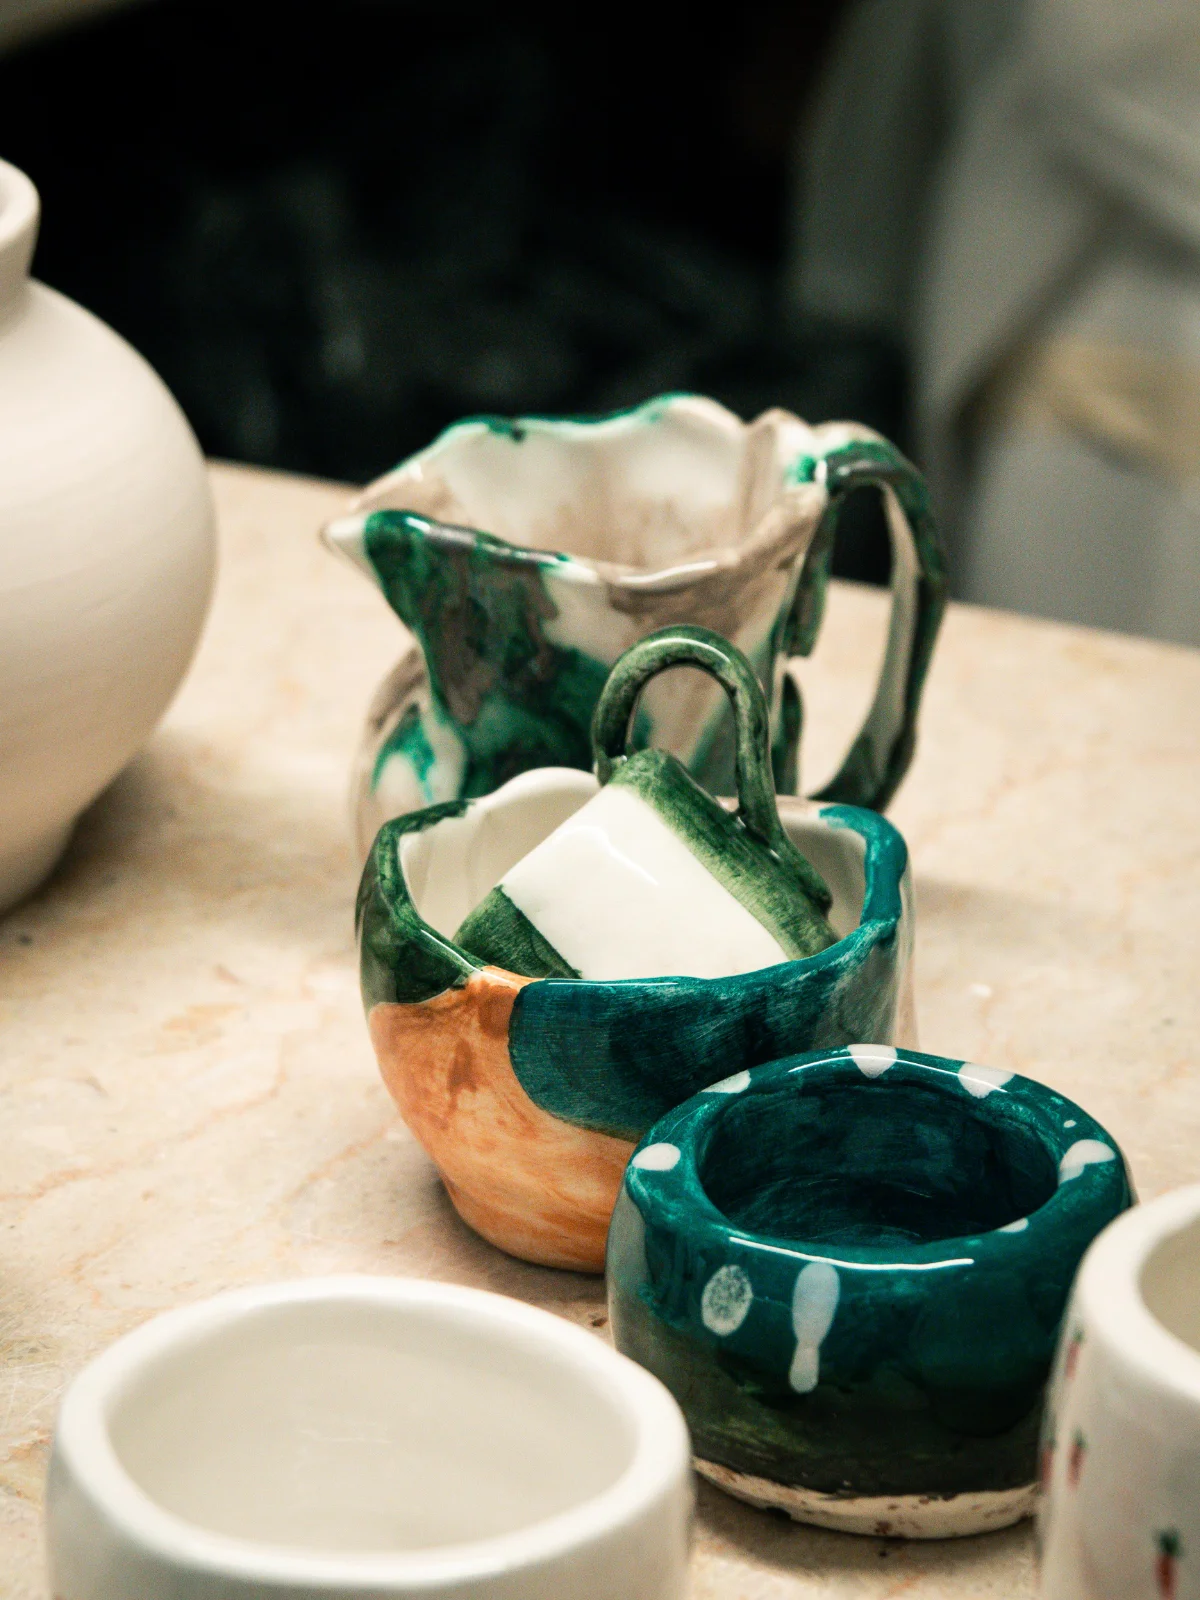 Ceramic mugs and bowls in Palermo